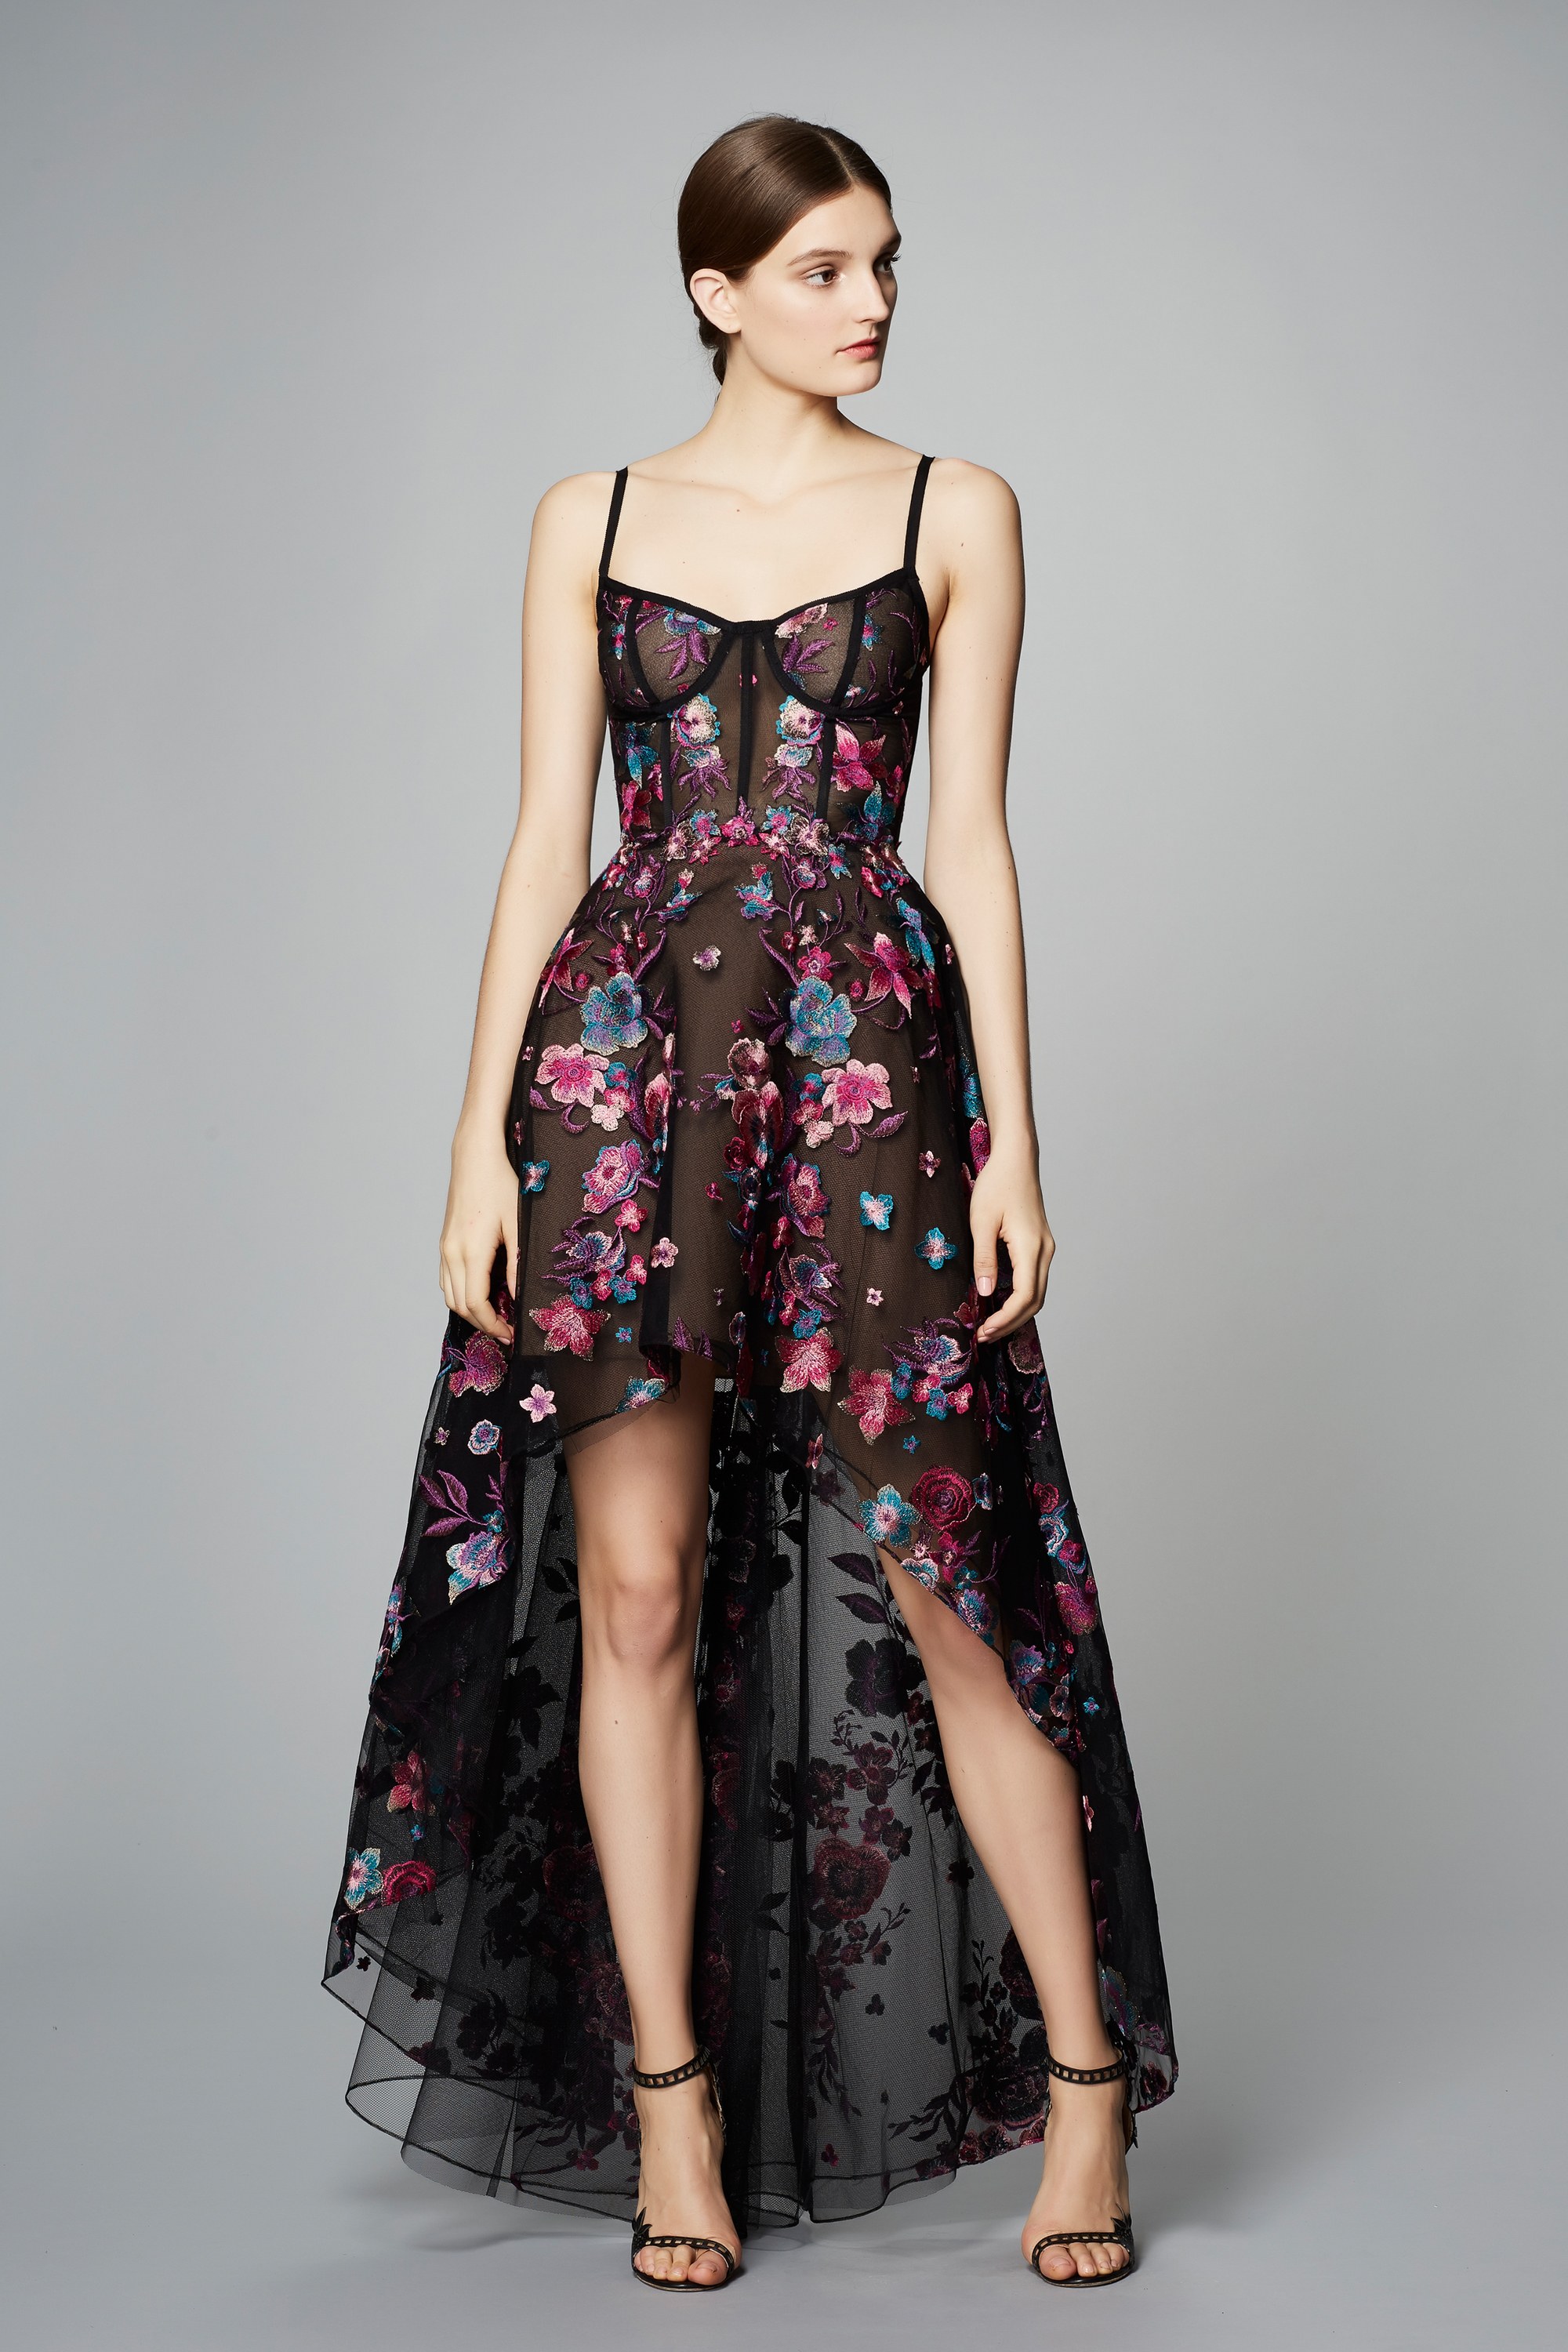 How To Work Dark Floral Prints Fall 2017 - Marchesa Notte | The Fashion Folks